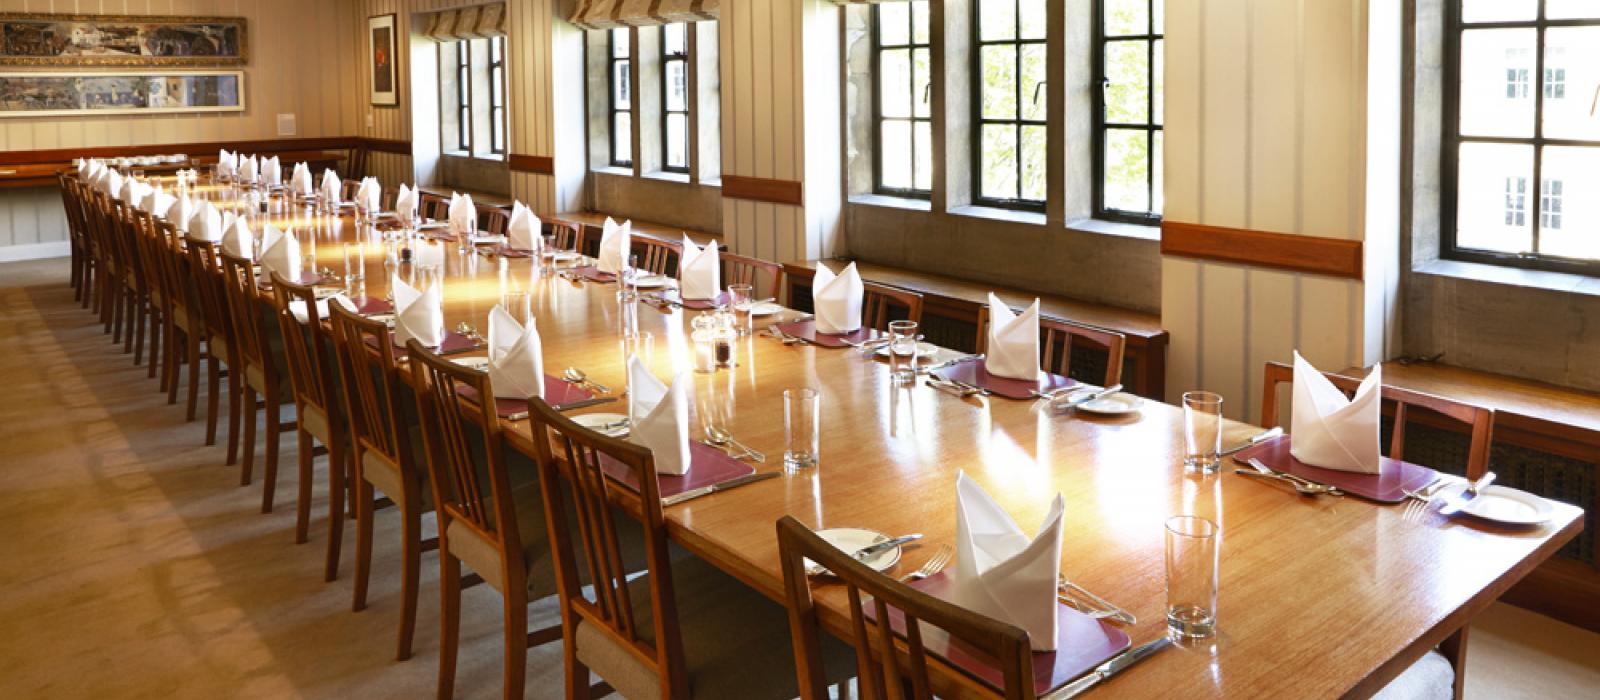 Fellows' Dining Room, Nuffield College